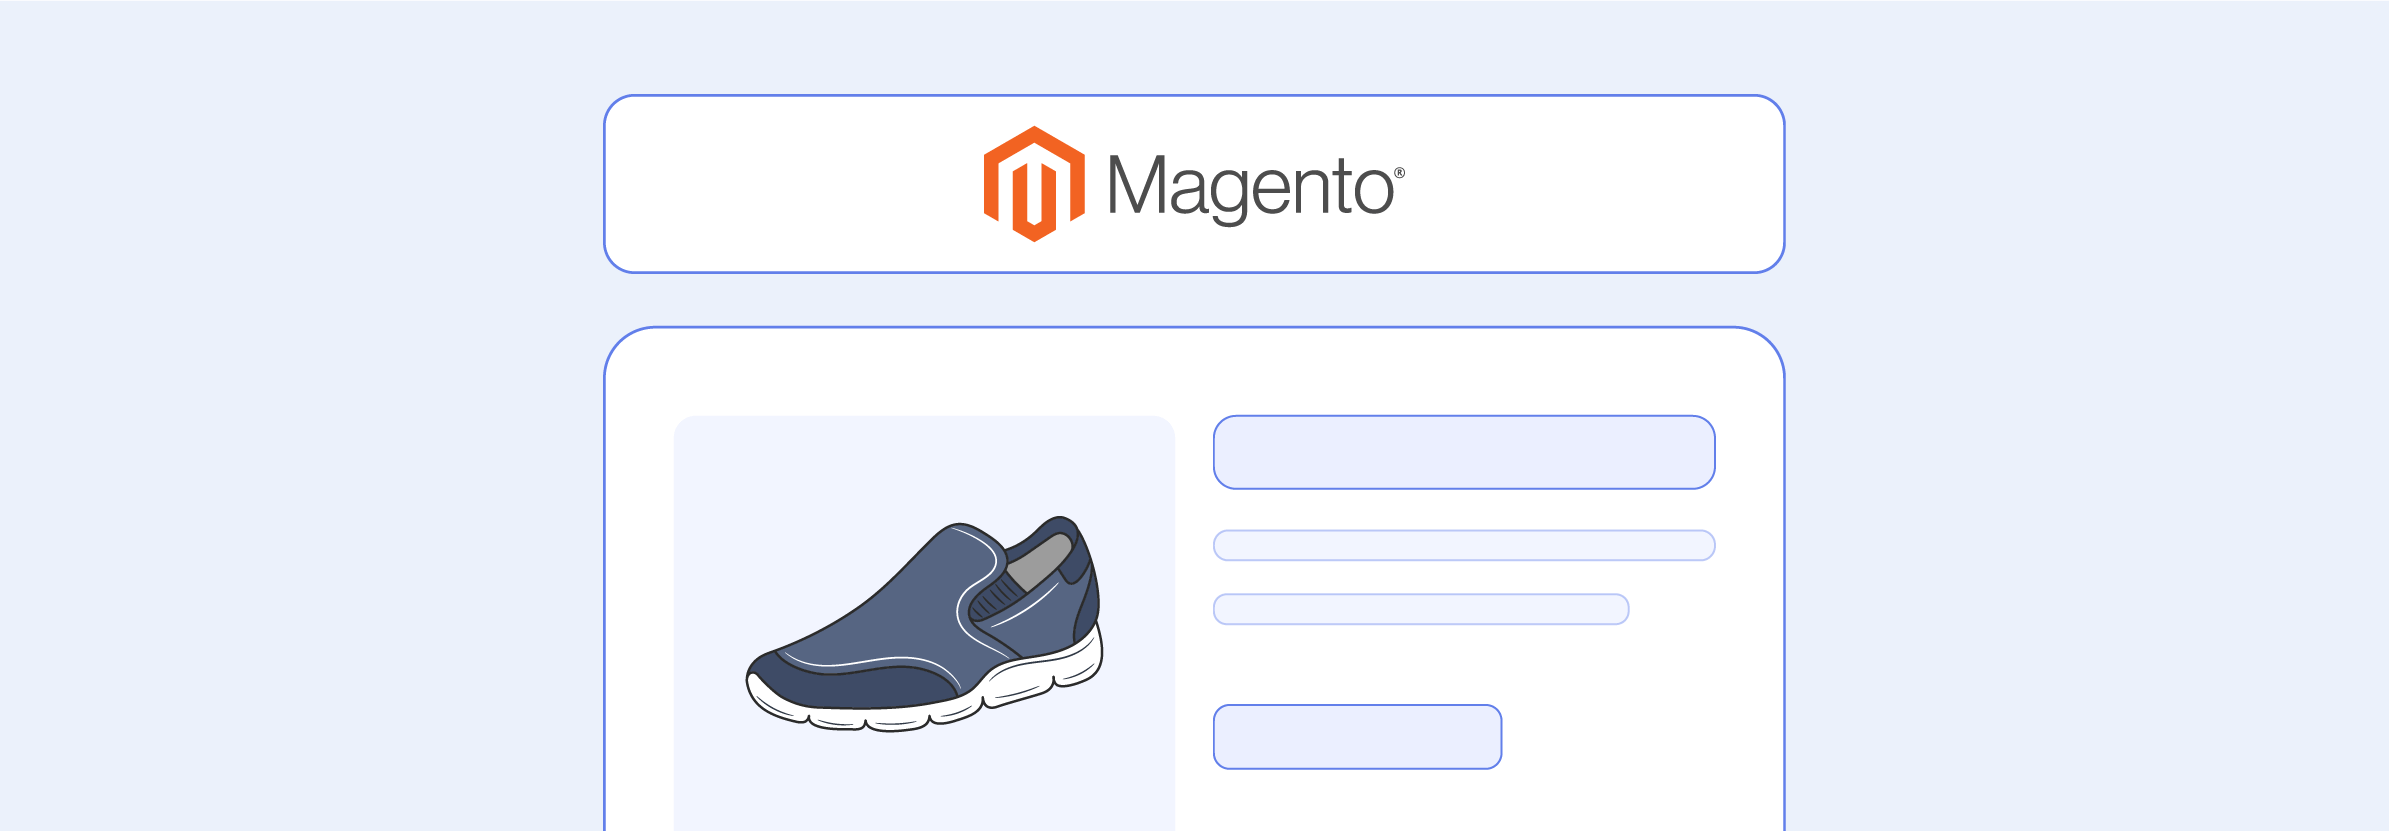 Overview of Magento as an open-source e-commerce platform